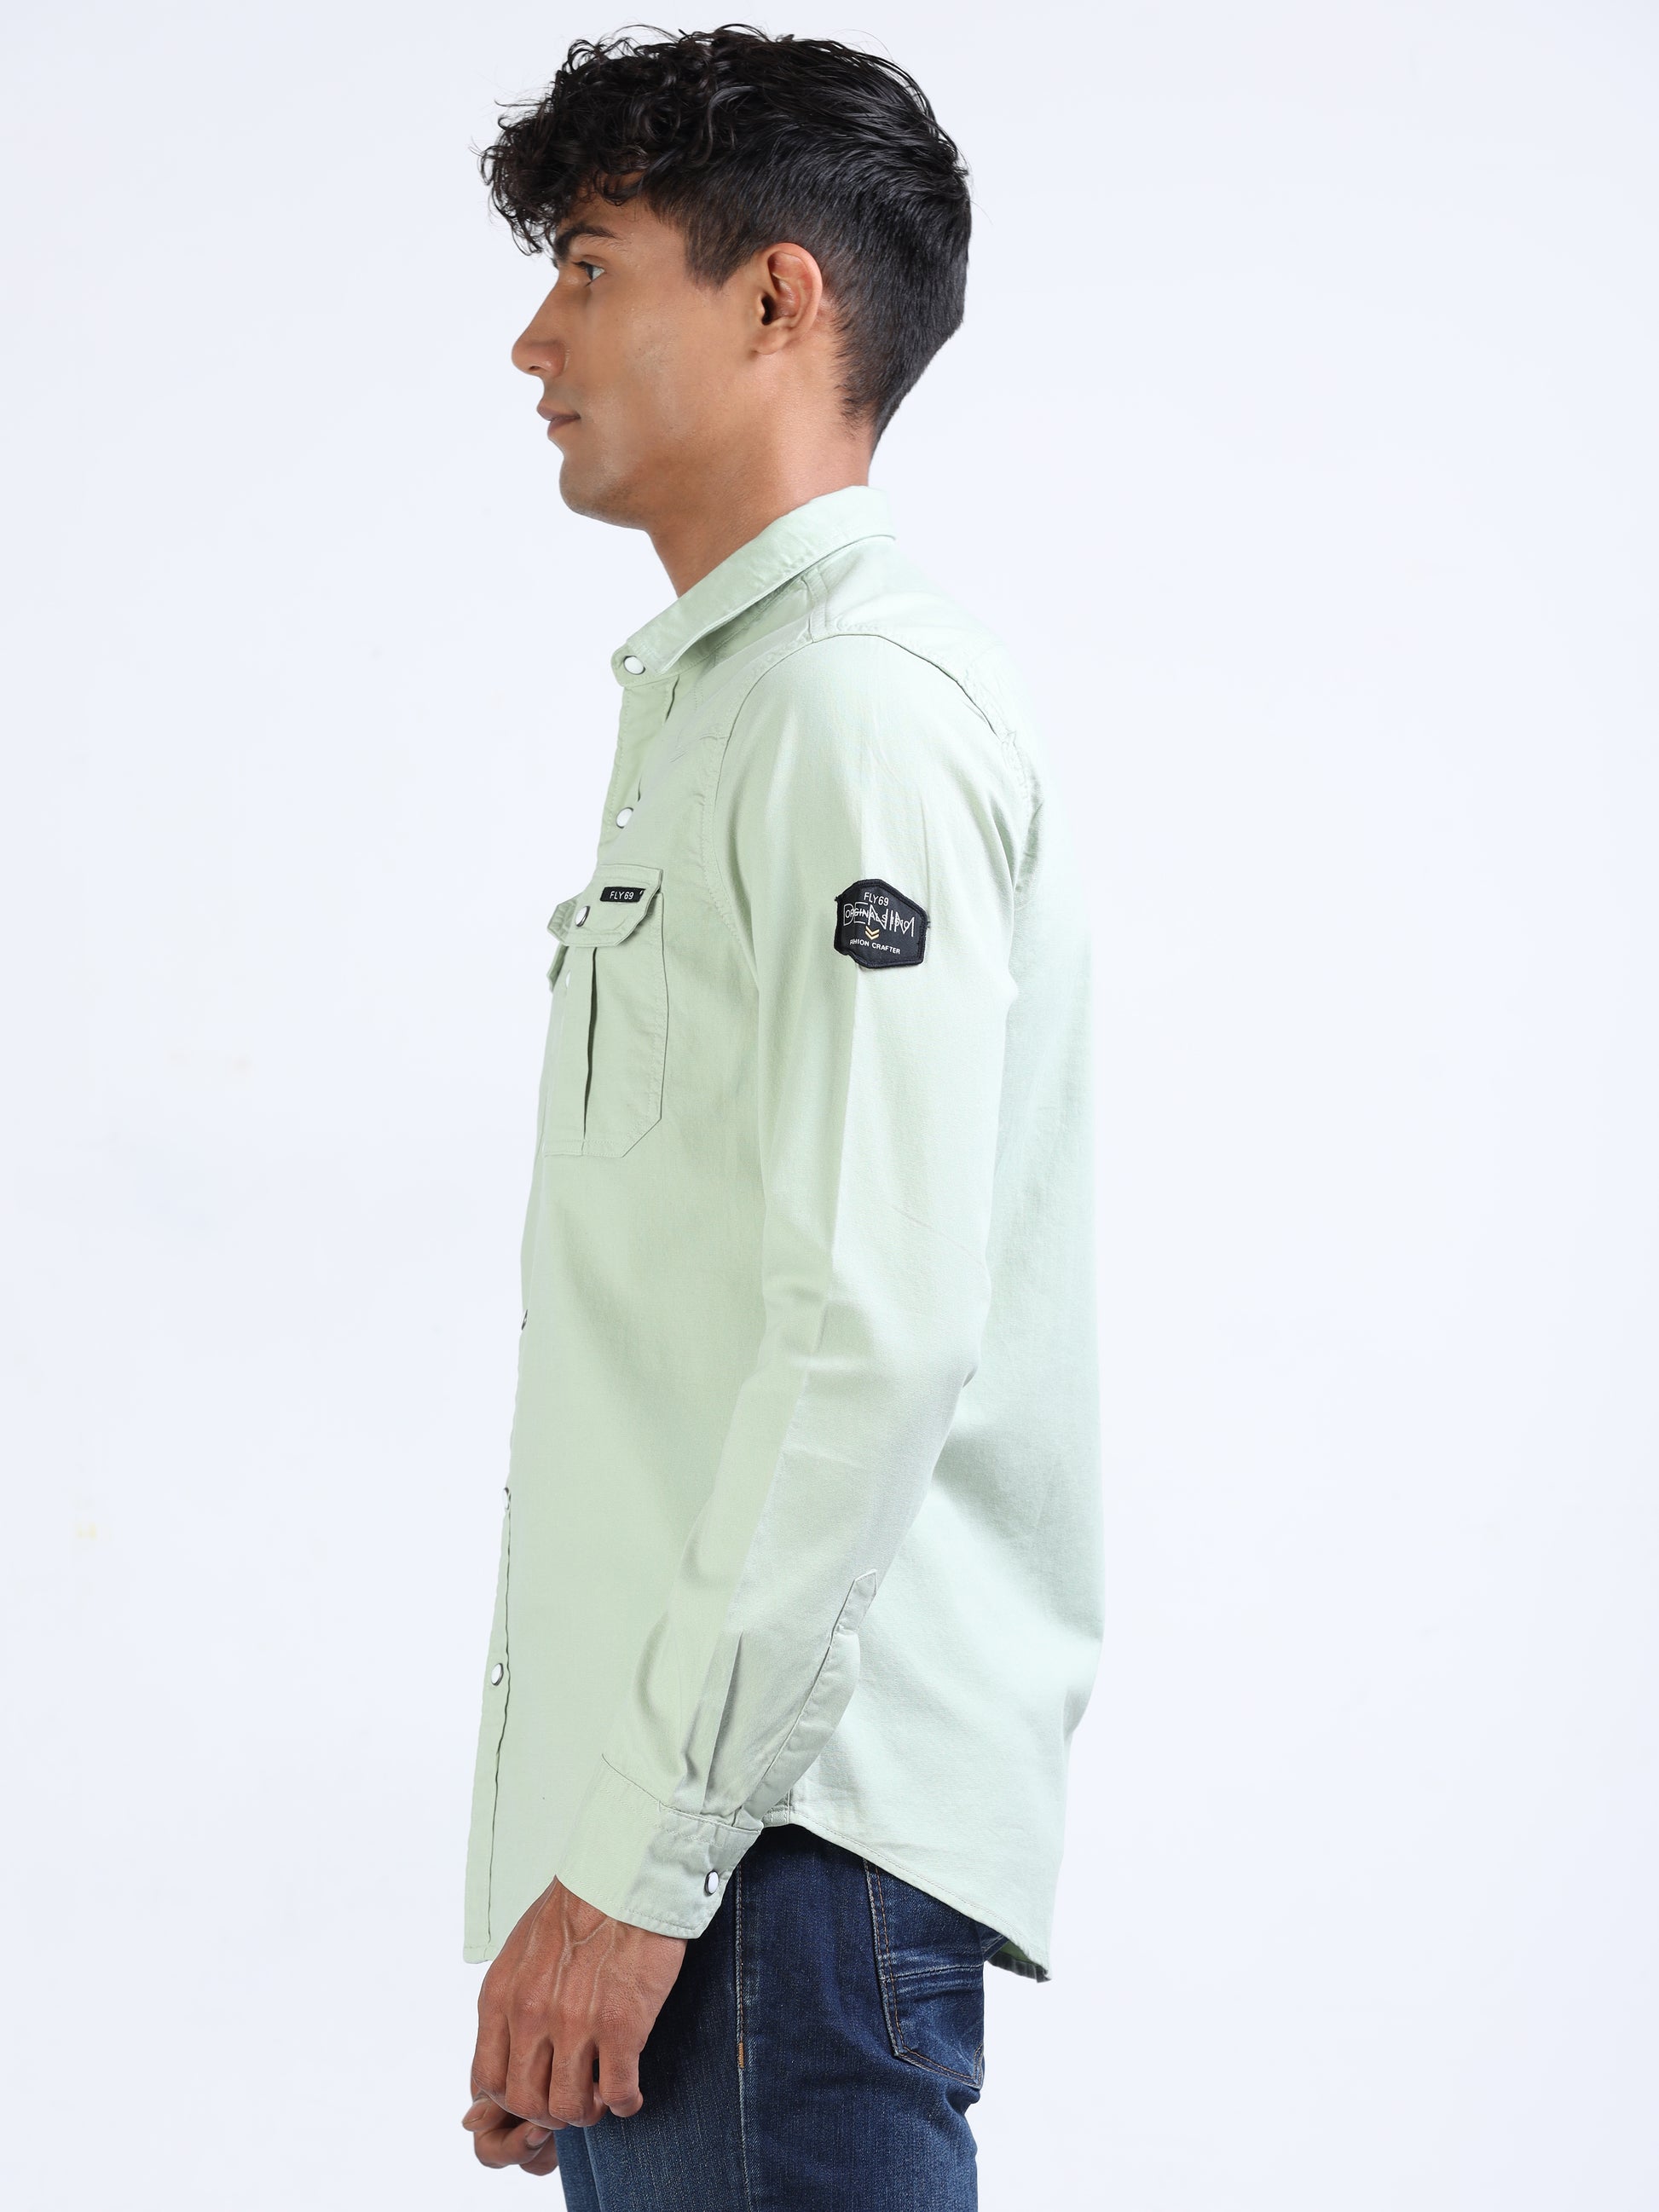 Frosted Mint RFD shirt for Men 